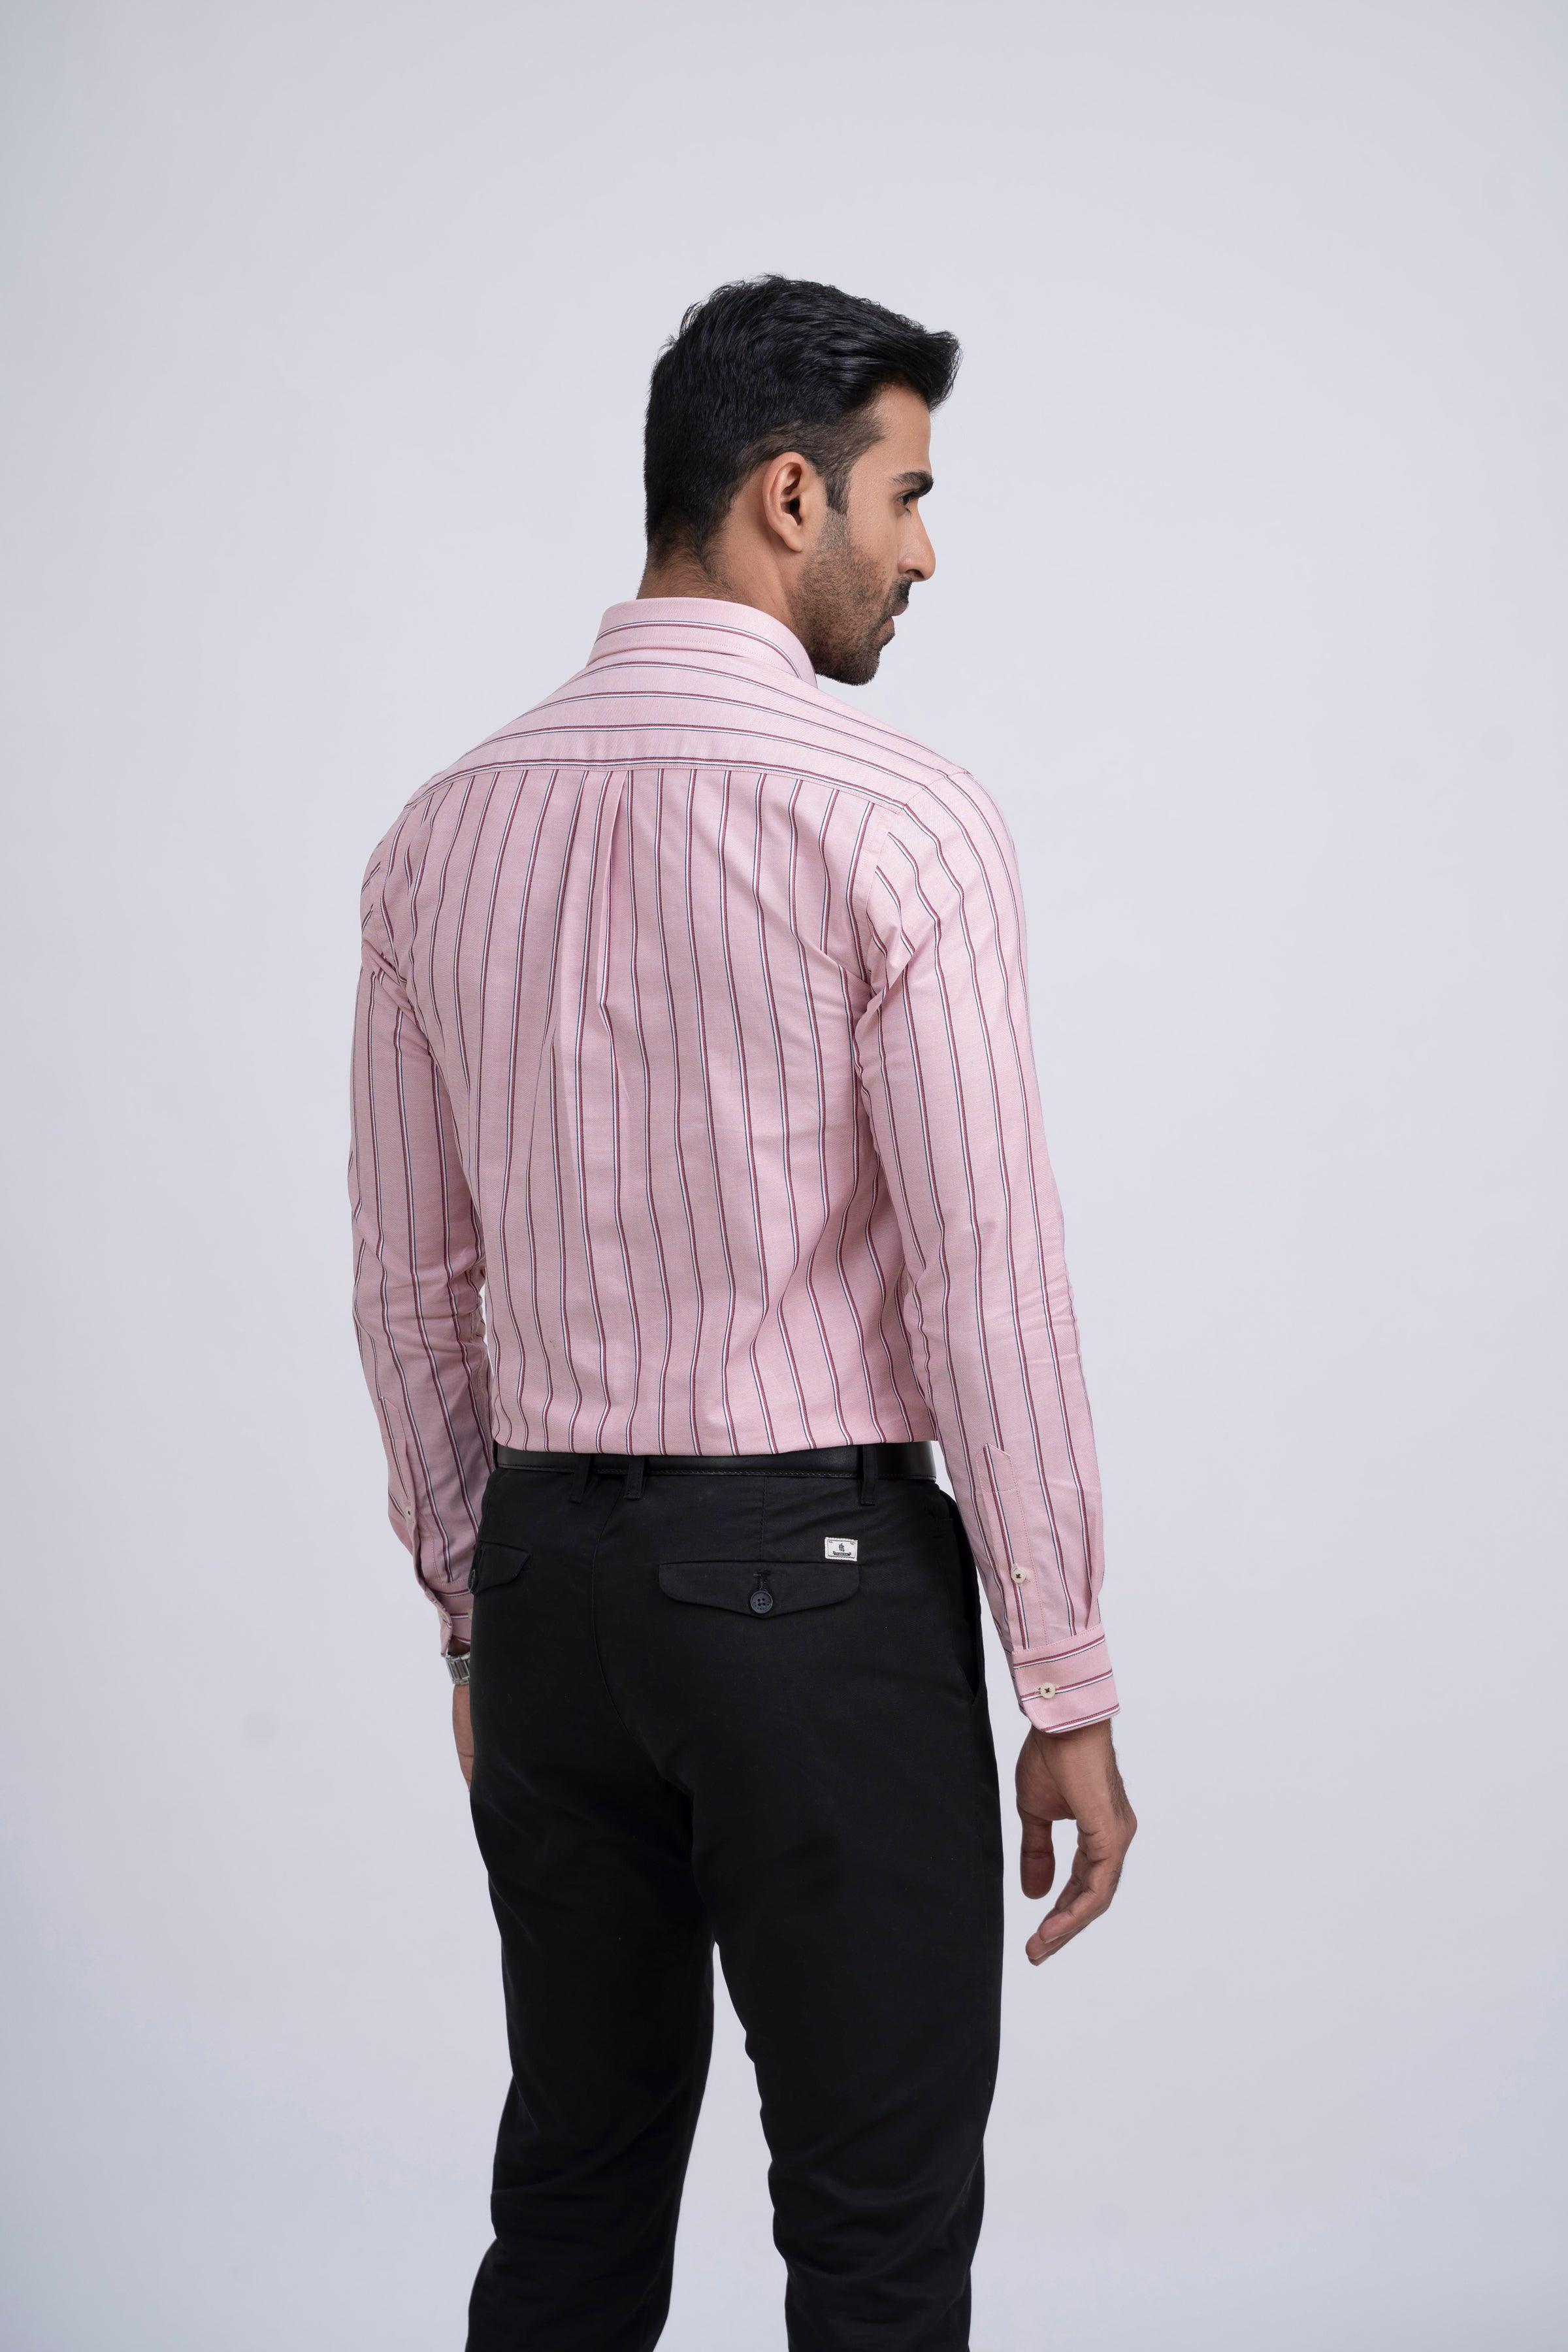 SEMI FORMAL SHIRT RED WINE at Charcoal Clothing